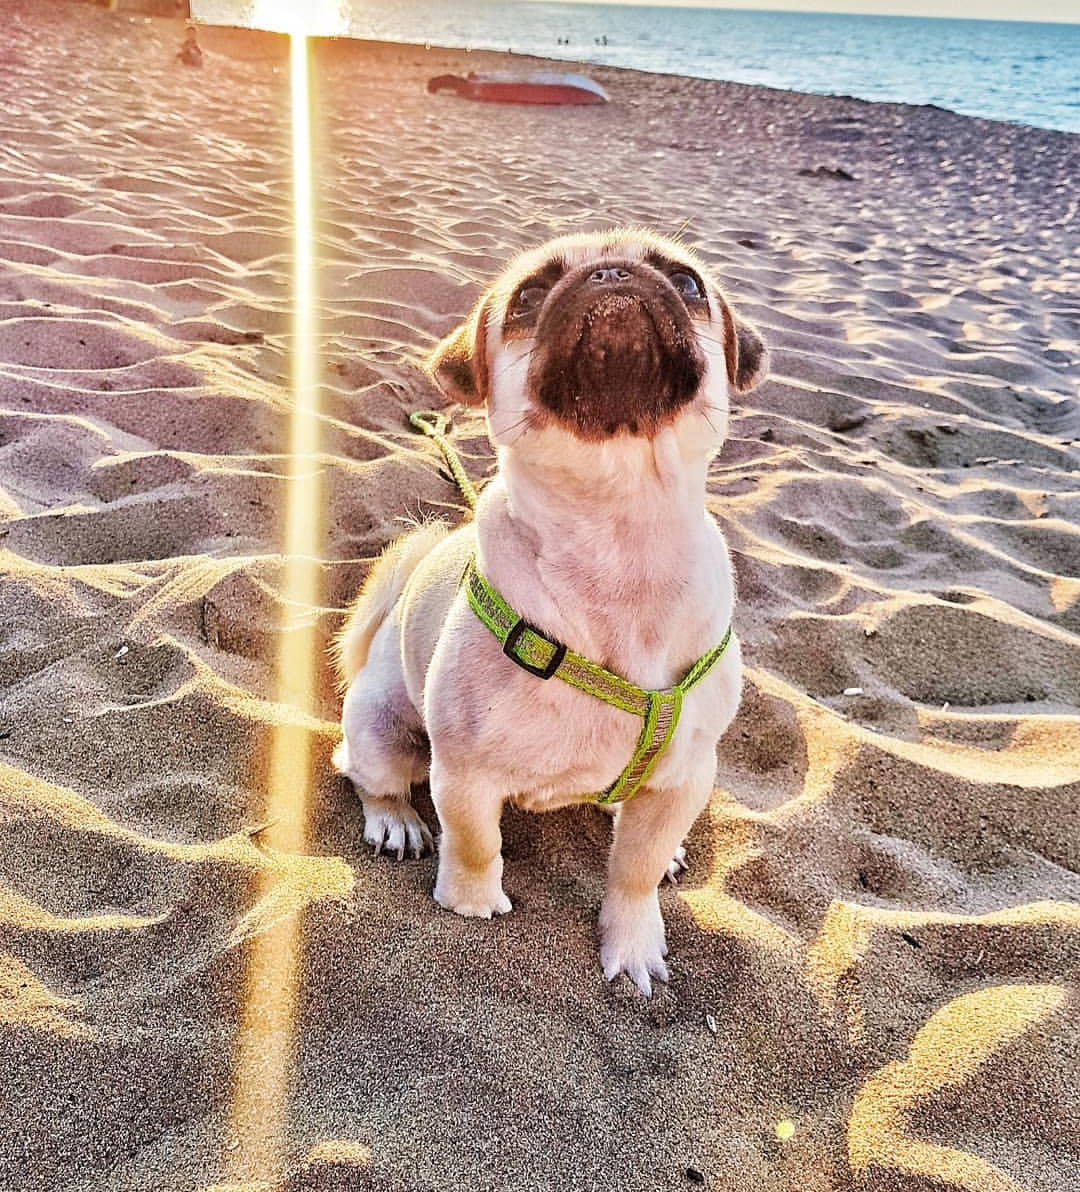 A Pug sitting in the sand at the beach